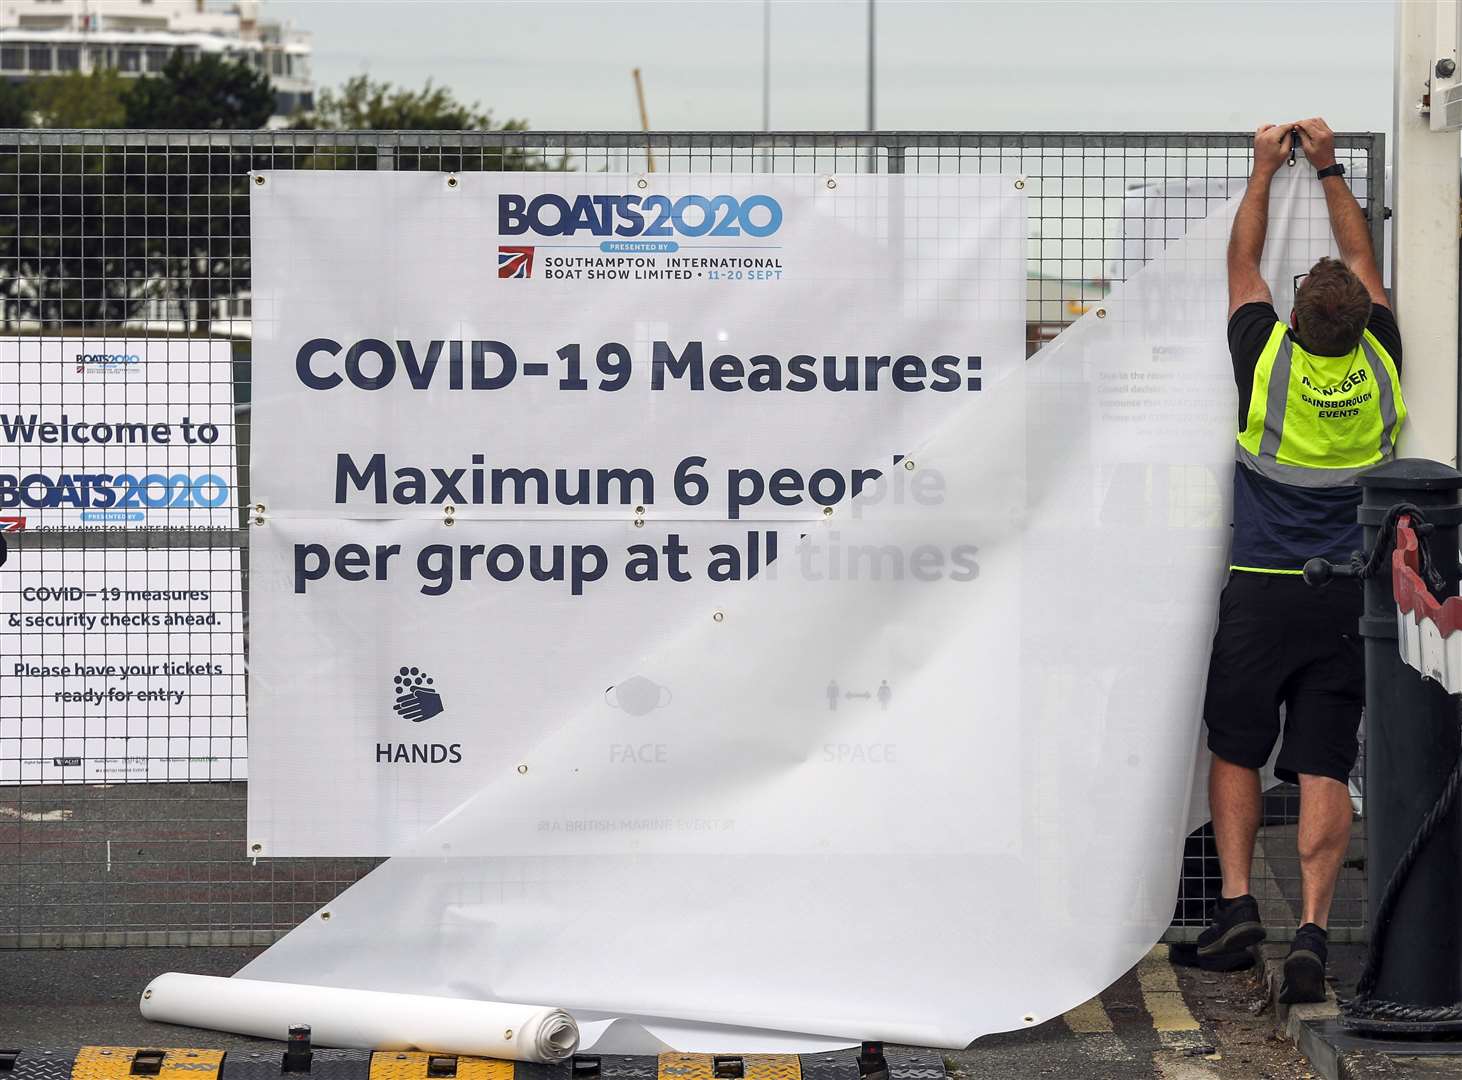 Staff put up screens at the Boats2020 show in Southampton following the cancellation of the event (Steve Parsons/PA)